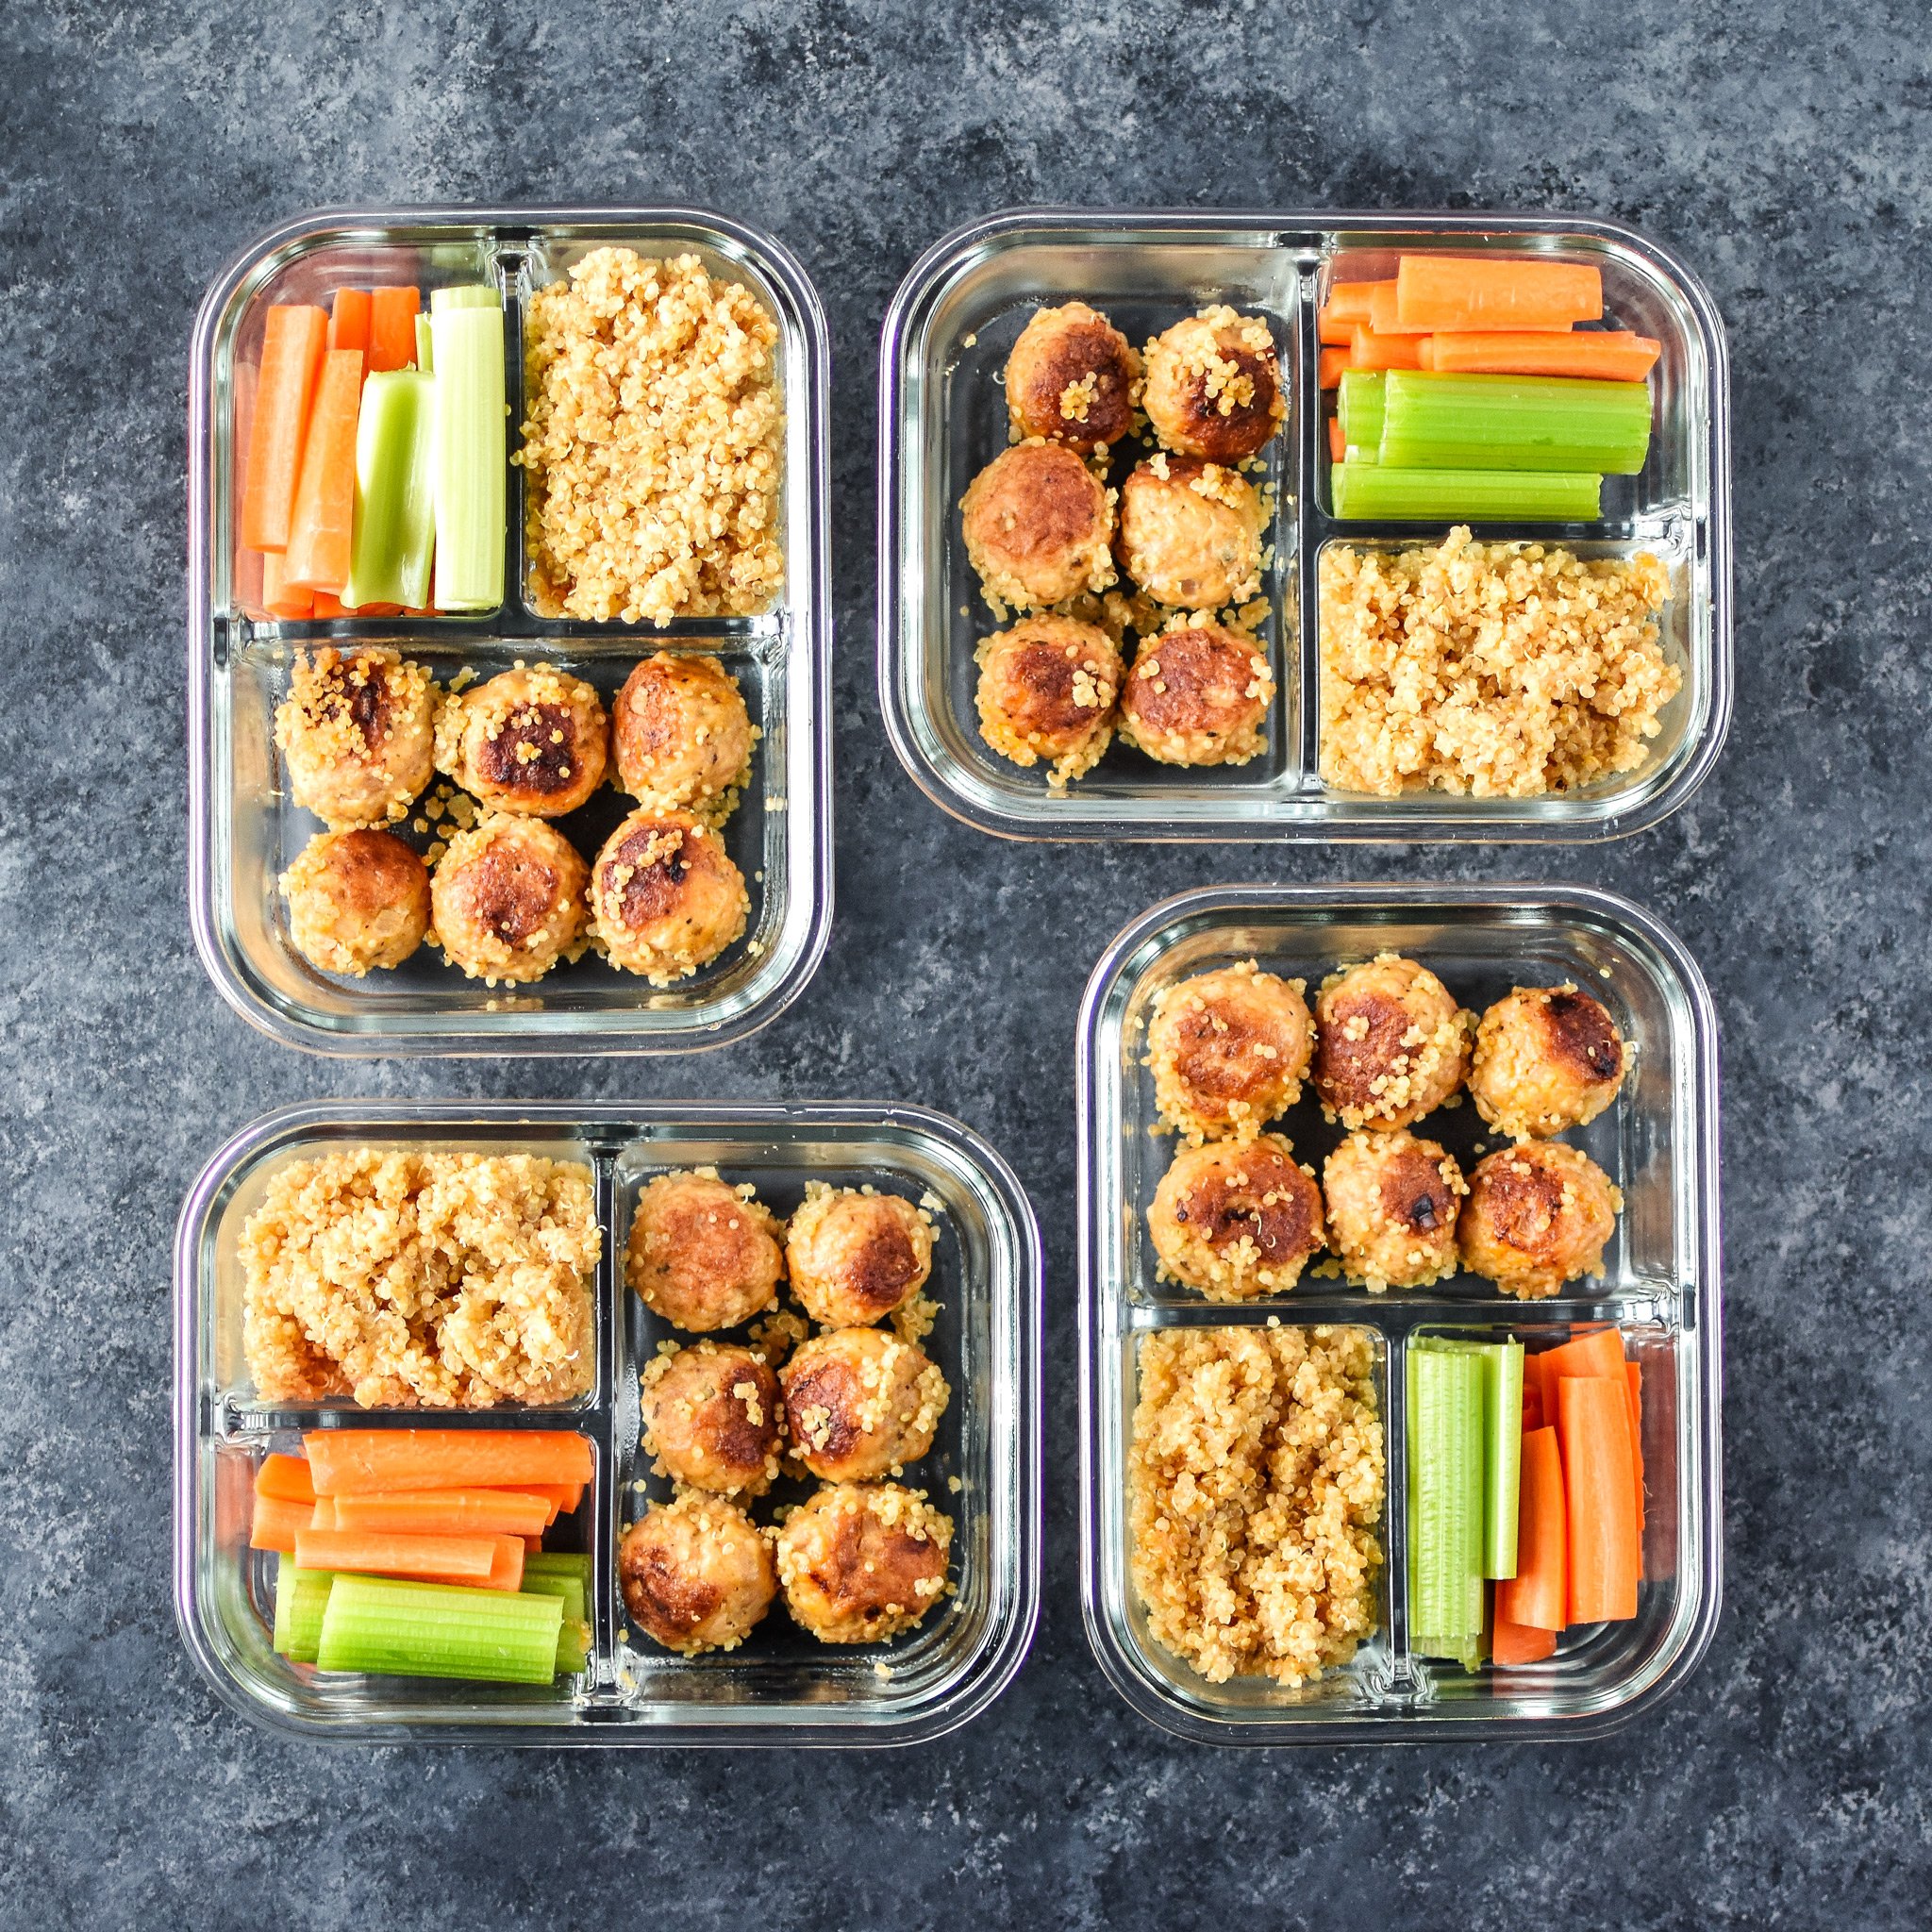 Four meal prep meatballs, quinoa and raw veggies lunches in glass containers. 